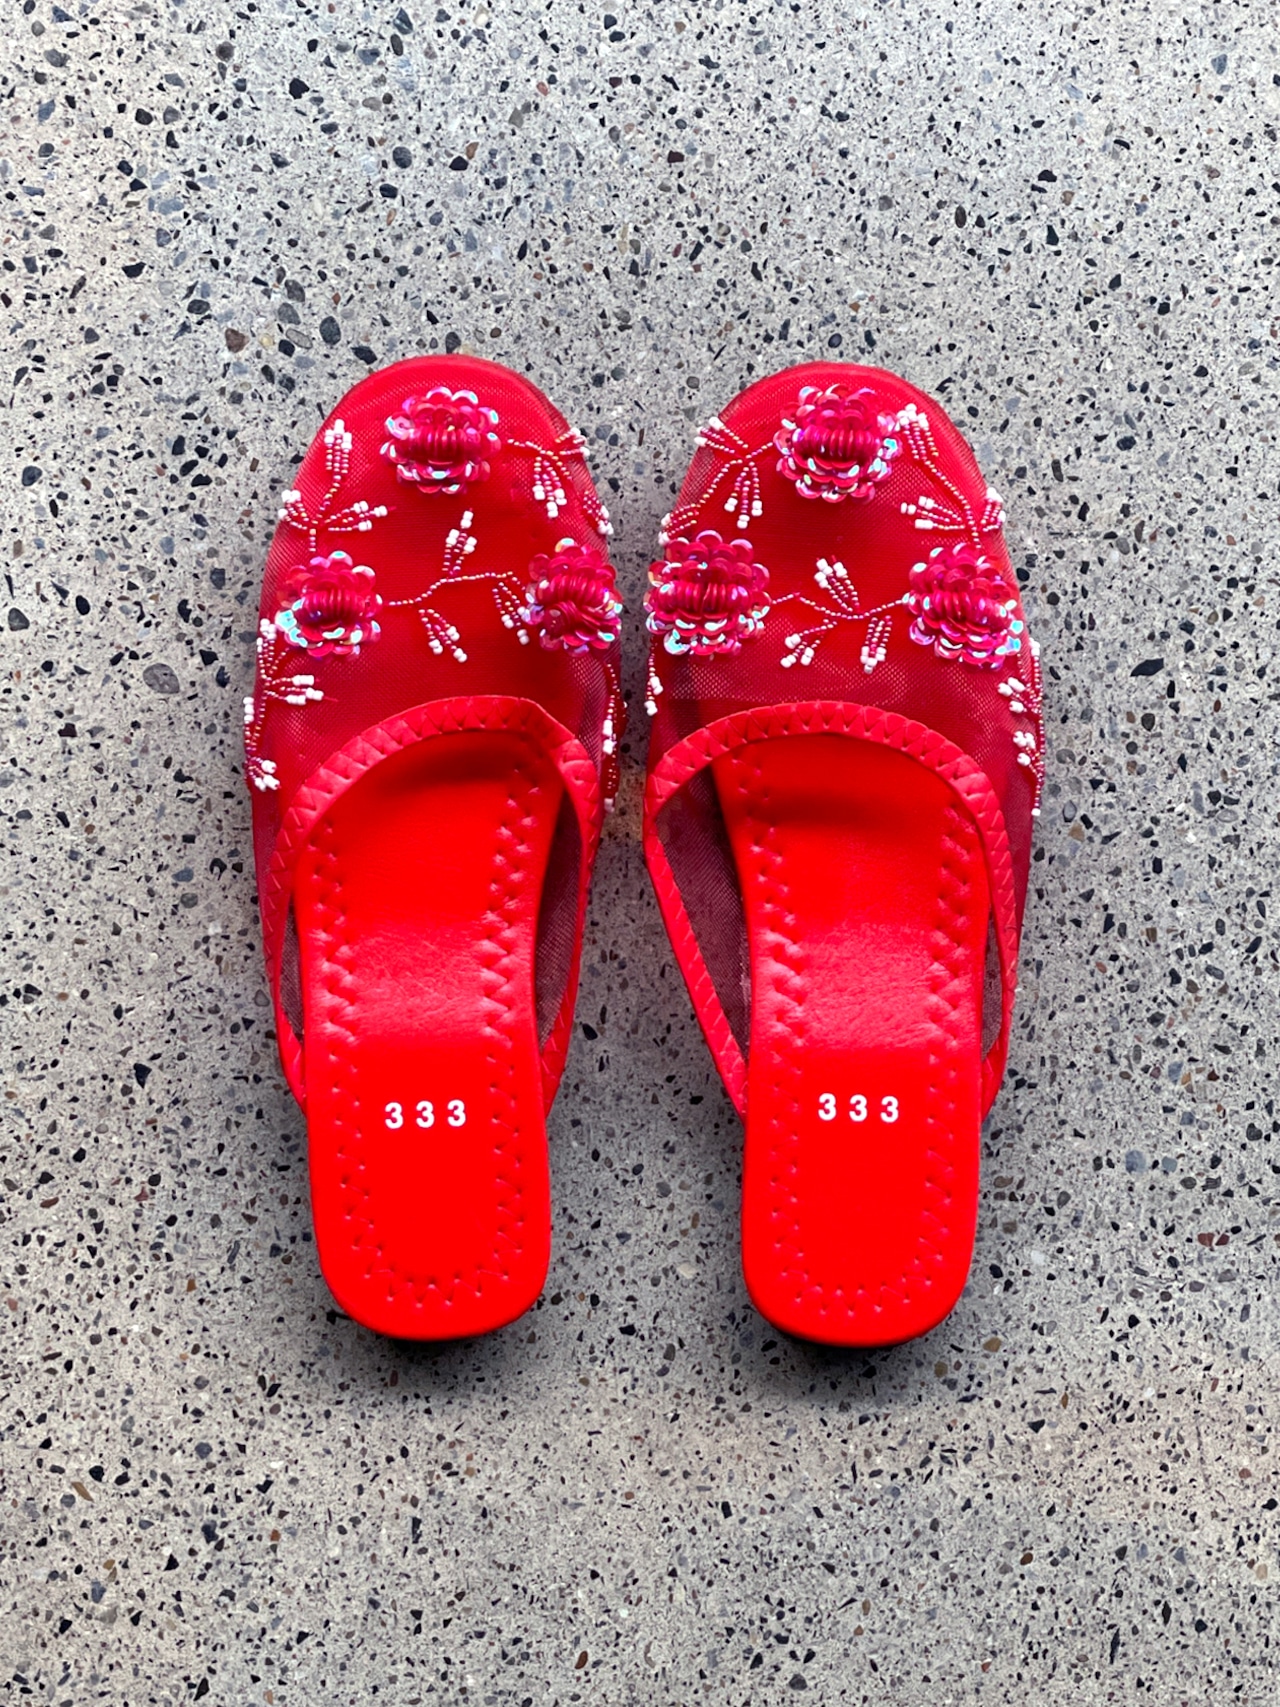 Mesh sandals（Red）